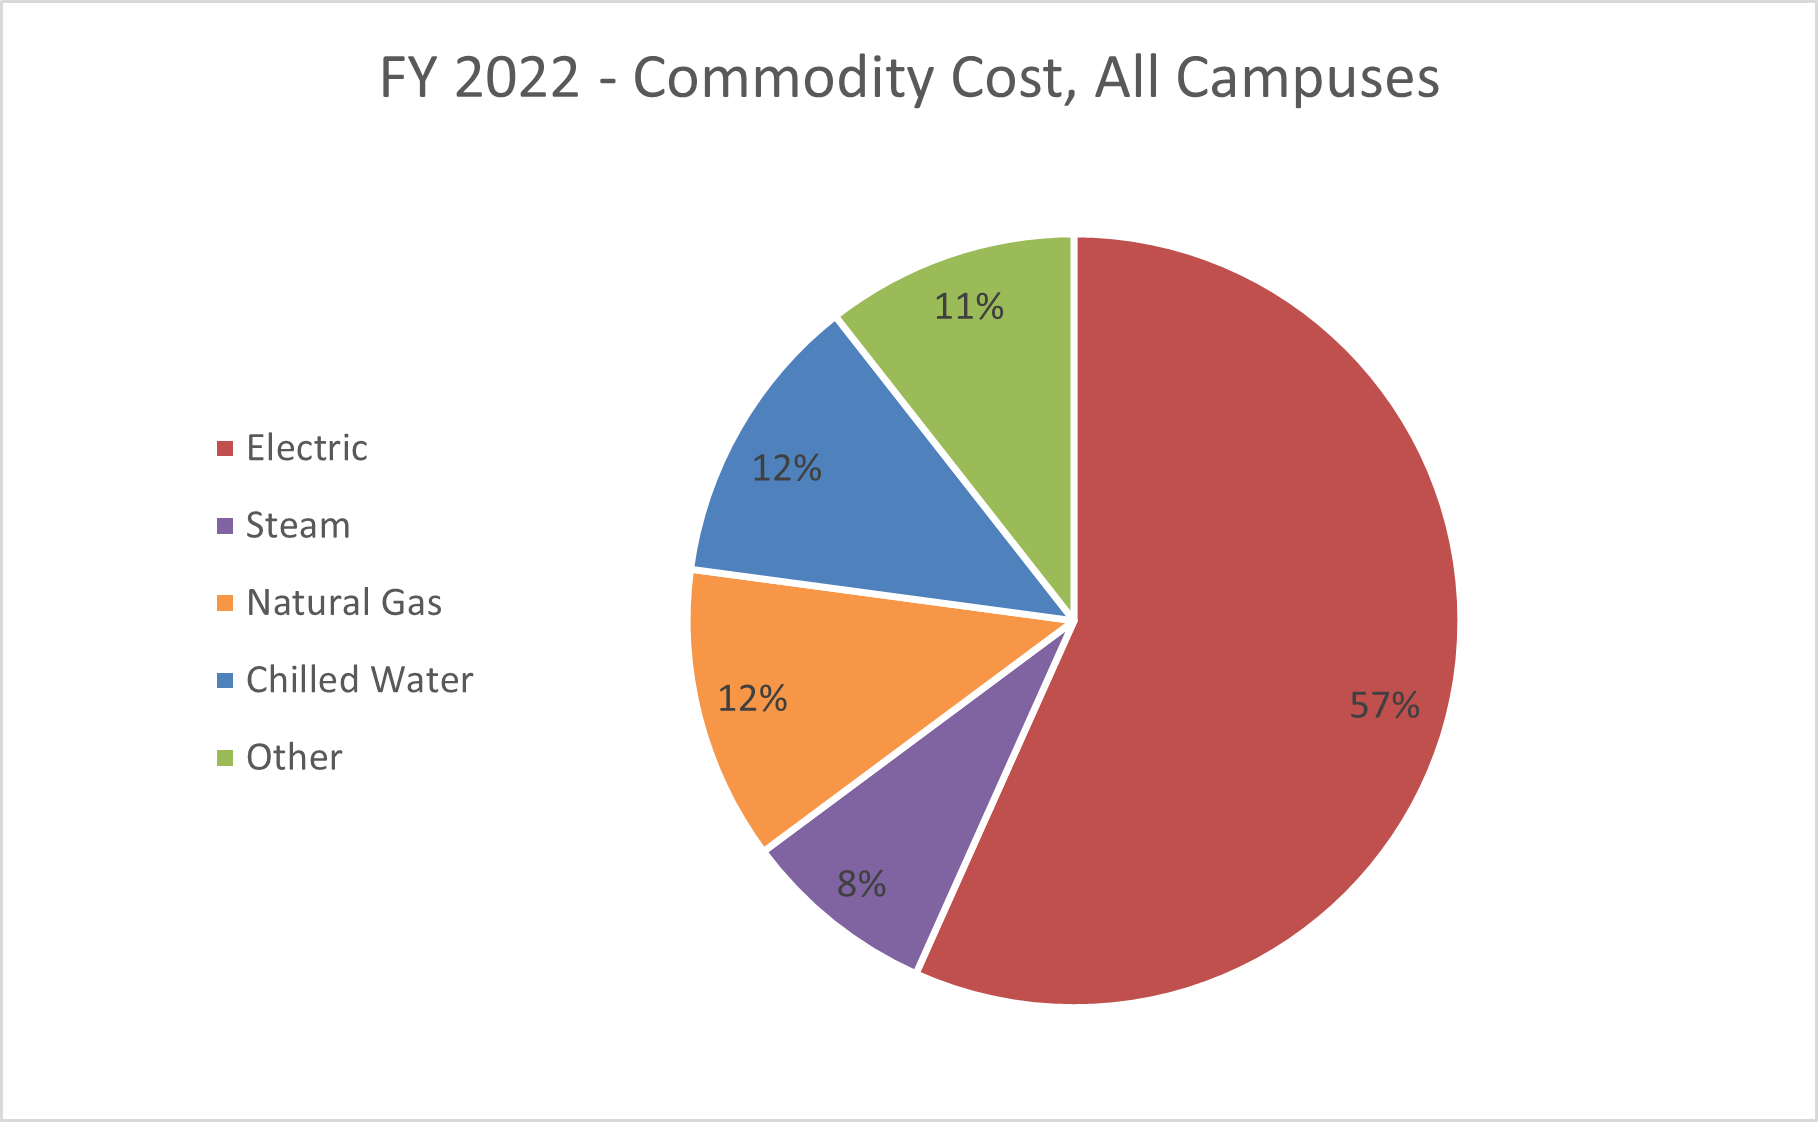 FY 2022 Commodity cost all campuses